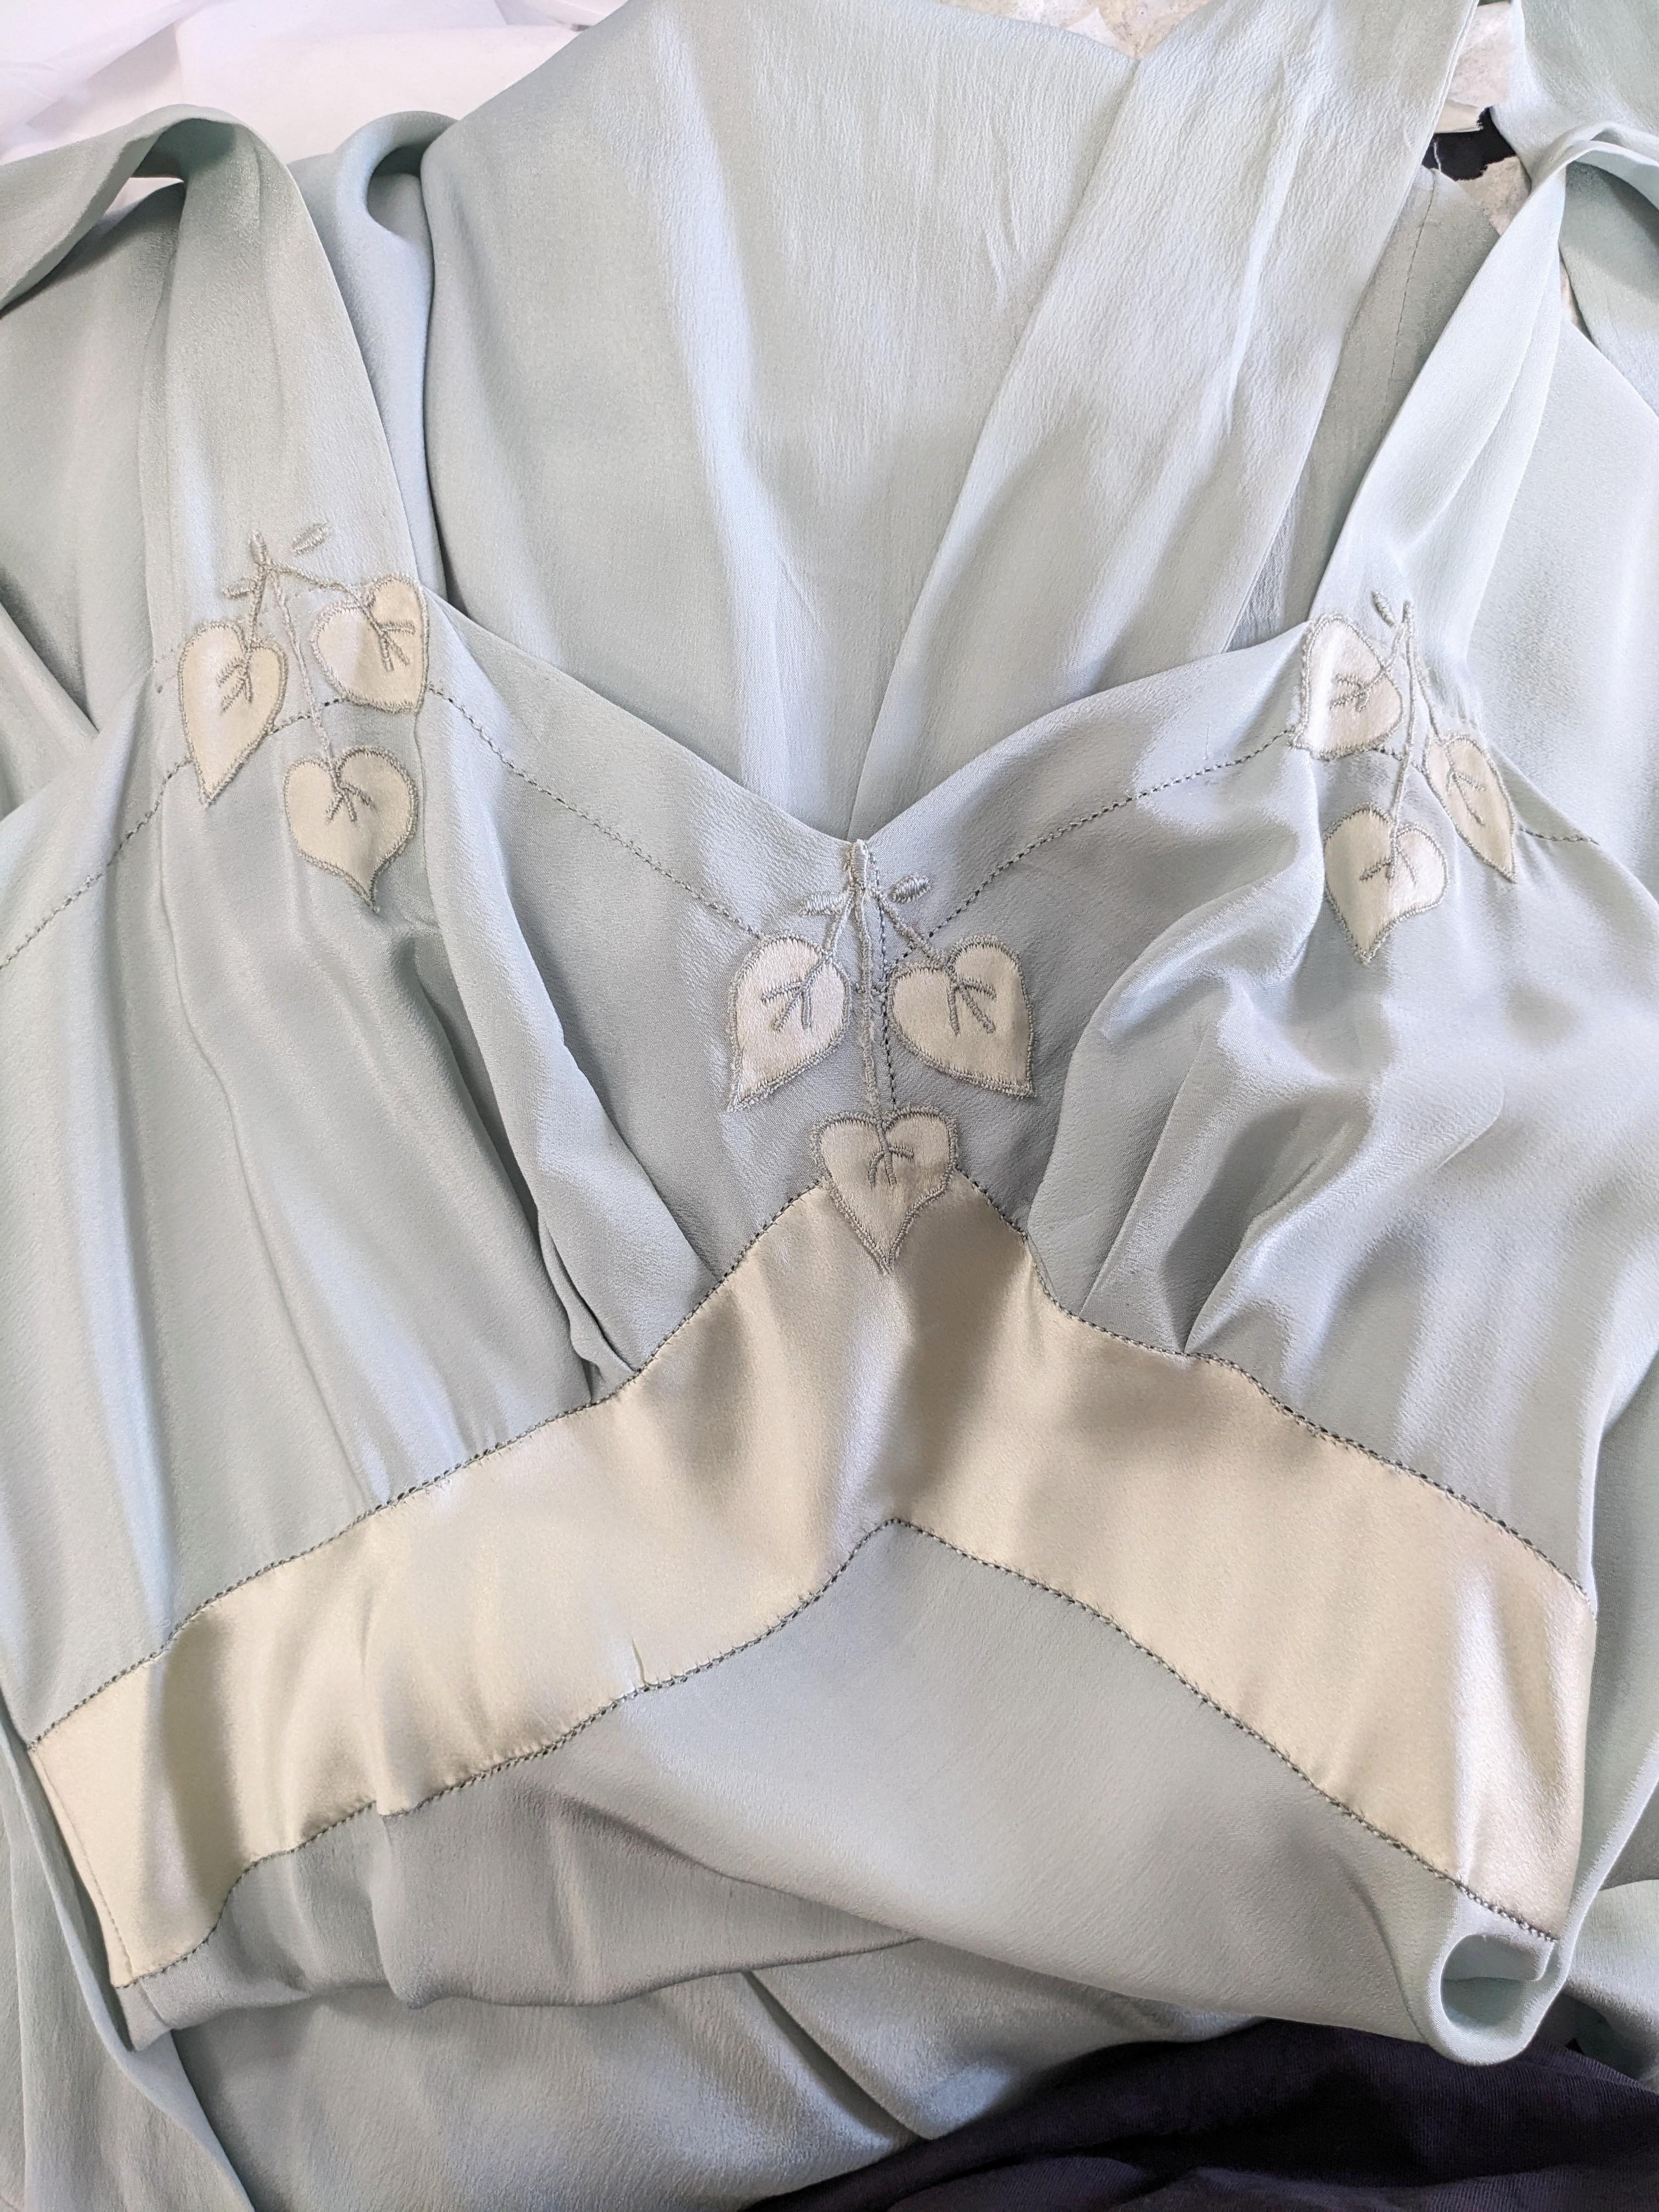 Super unusual 1930s French pale slate blue silk crepe and silk satin long gown. Silk satin philodendron leaf appligue on bodice, and satin waist insert with long satin self ties at the shoulders which can be transformed in many ways. Fitted through